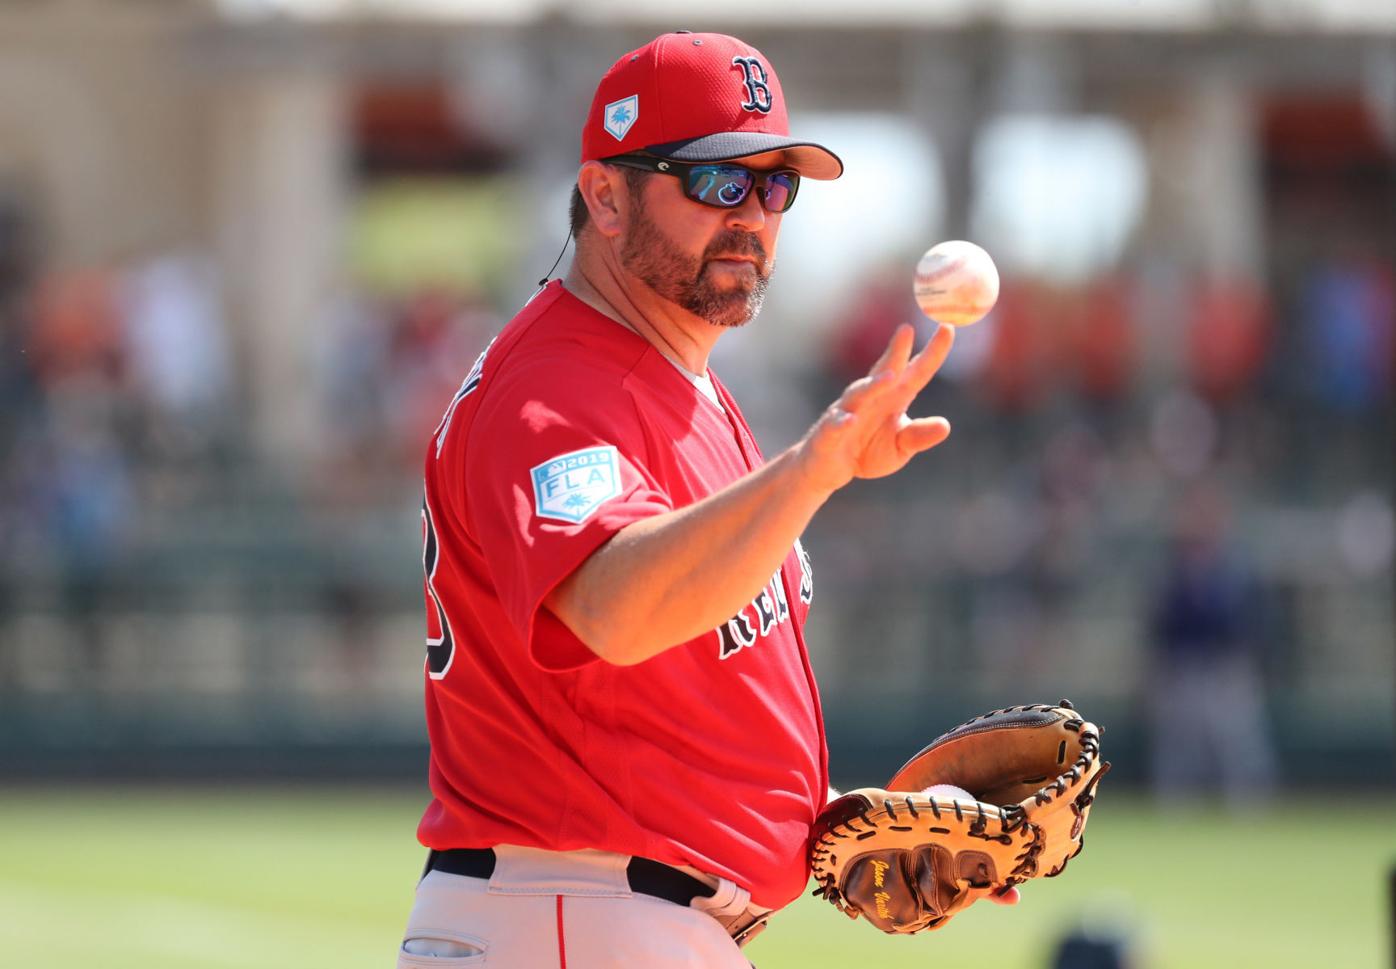 Home Team: Behind the plate with Catherine and Jason Varitek